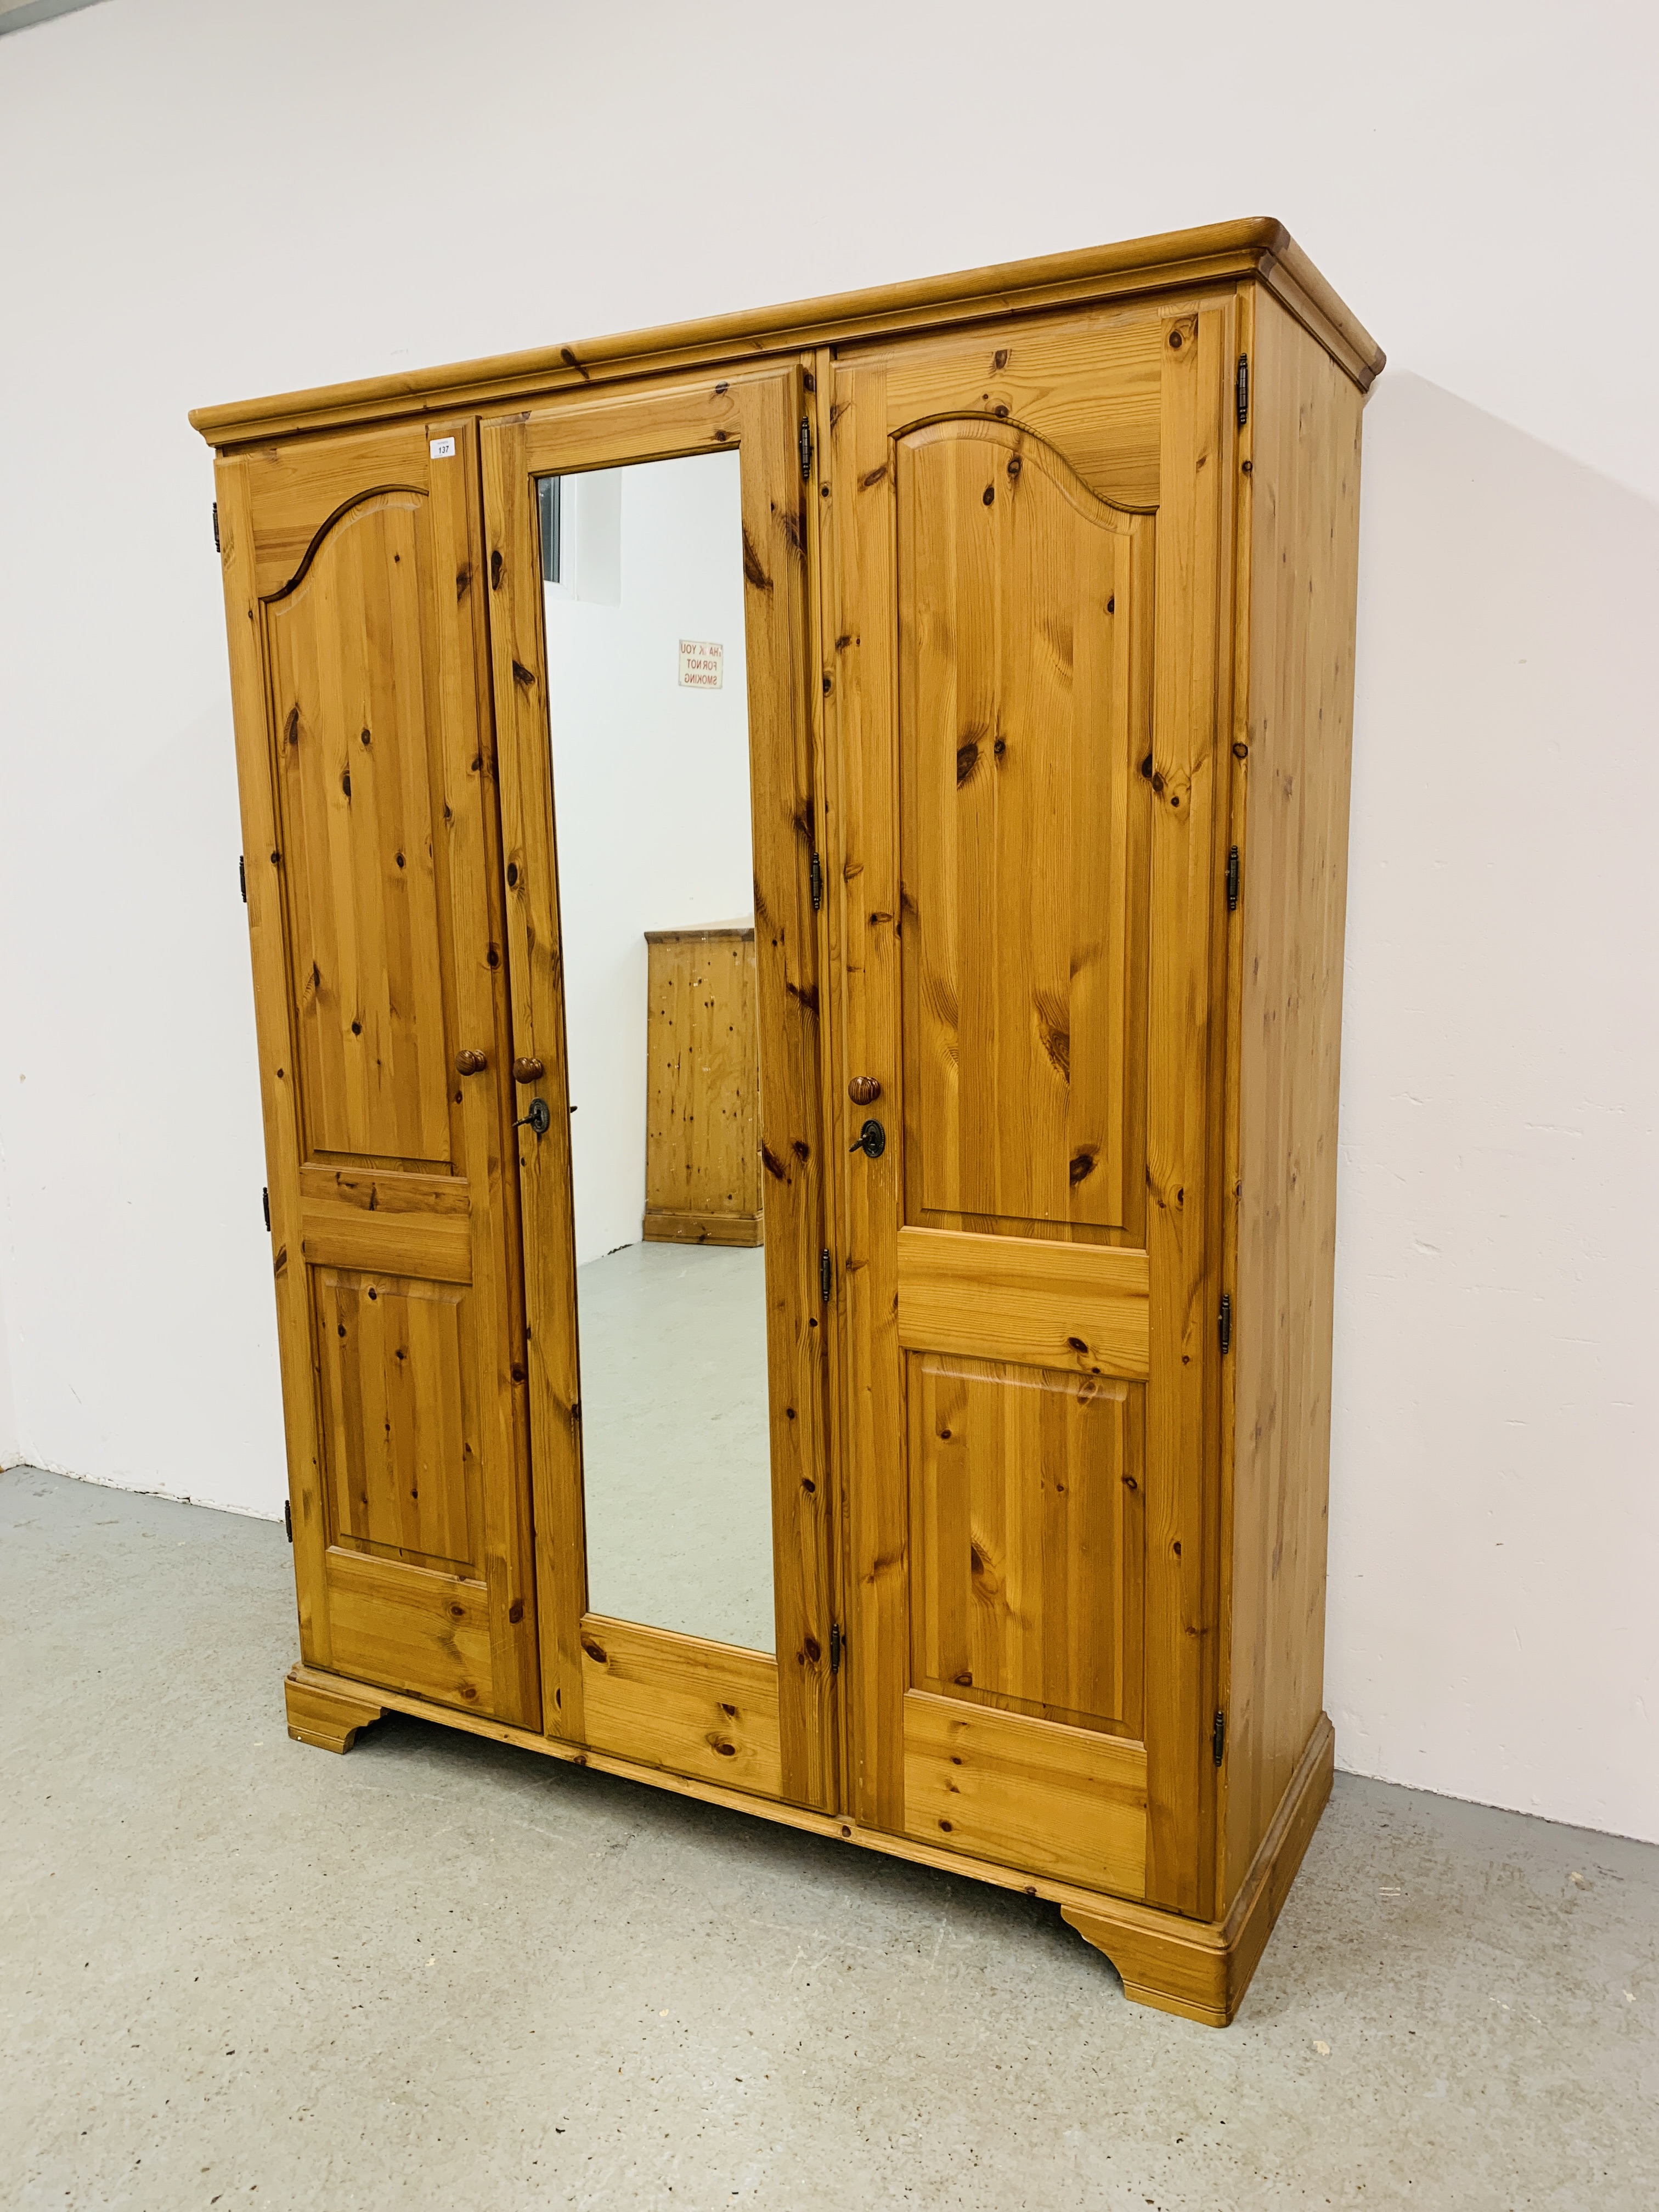 A GOOD QUALITY MODERN HONEY PINE TRIPLE WARDROBE WITH CENTRAL MIRRORED DRAWER MANUFACTURED BY